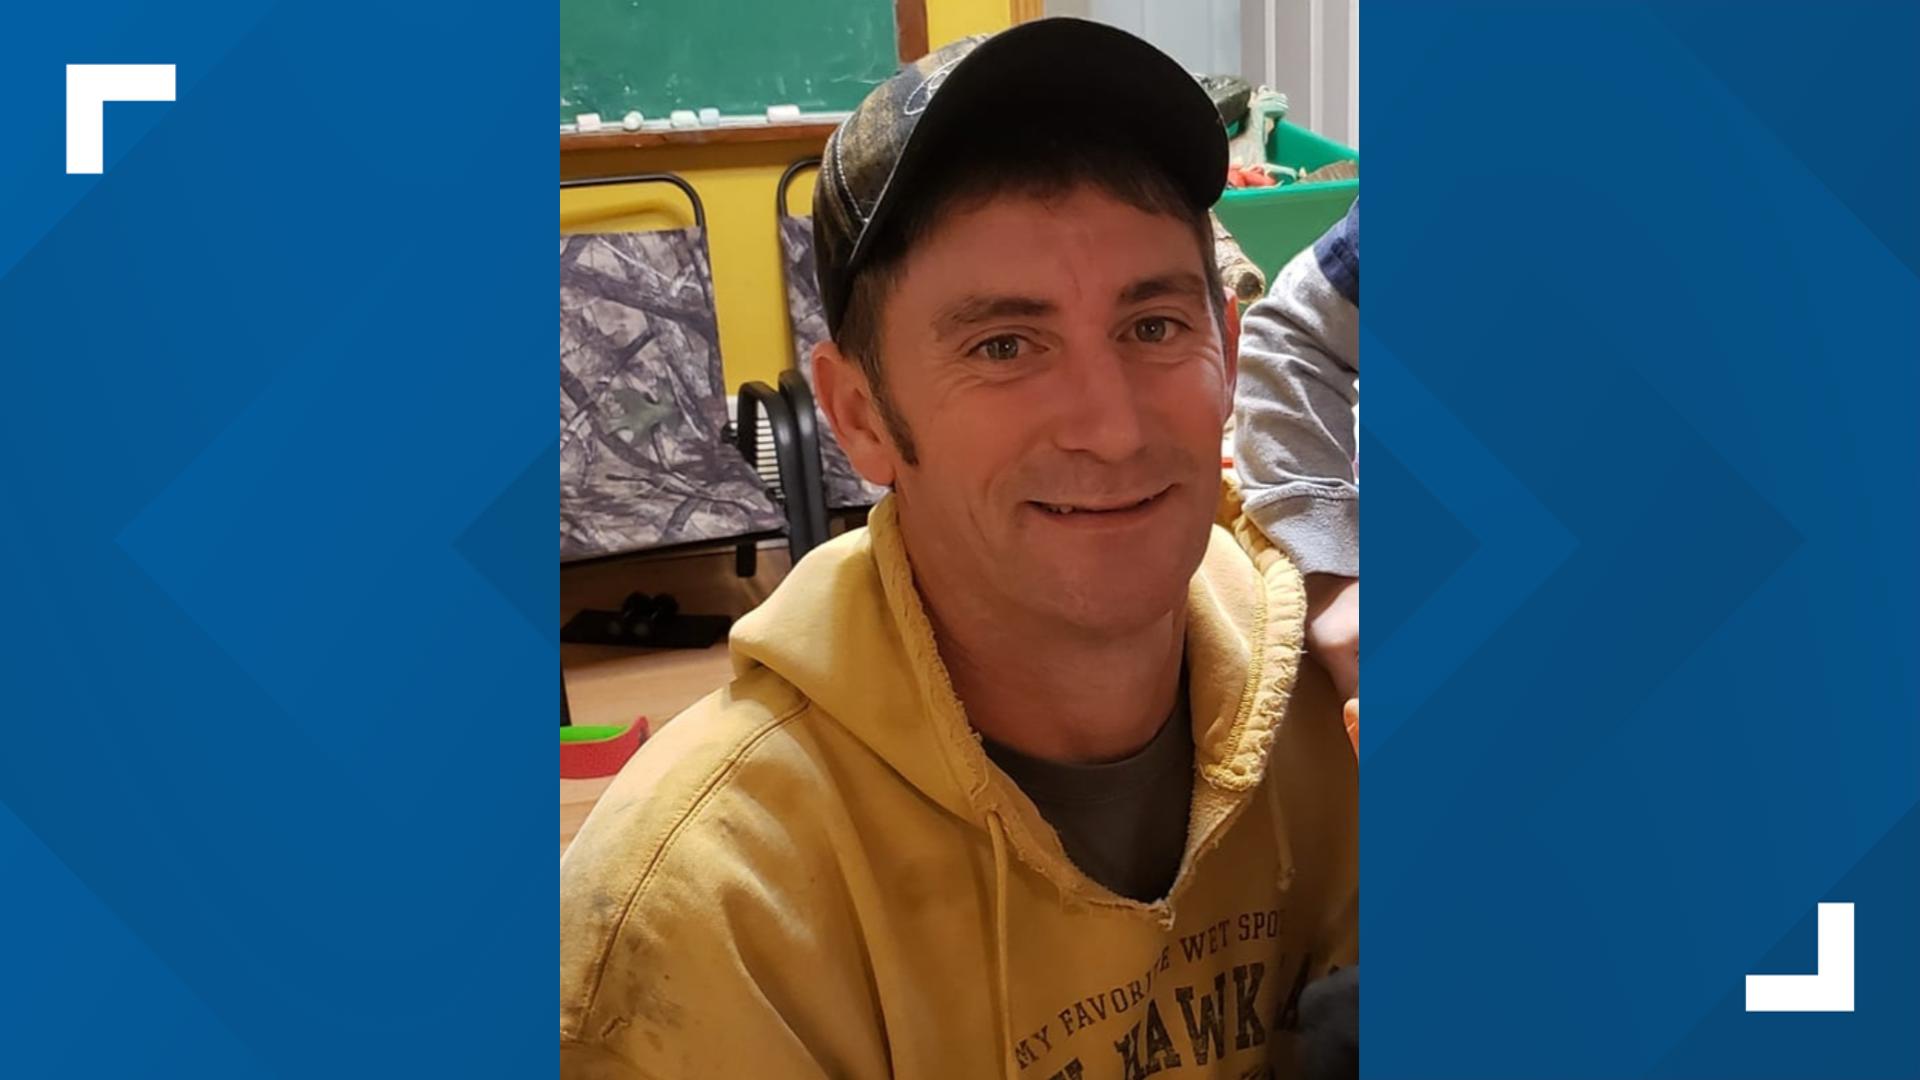 Someone found a body in a Sac County field near the intersection where missing Iowa man David Schultz's truck was discovered back in November.